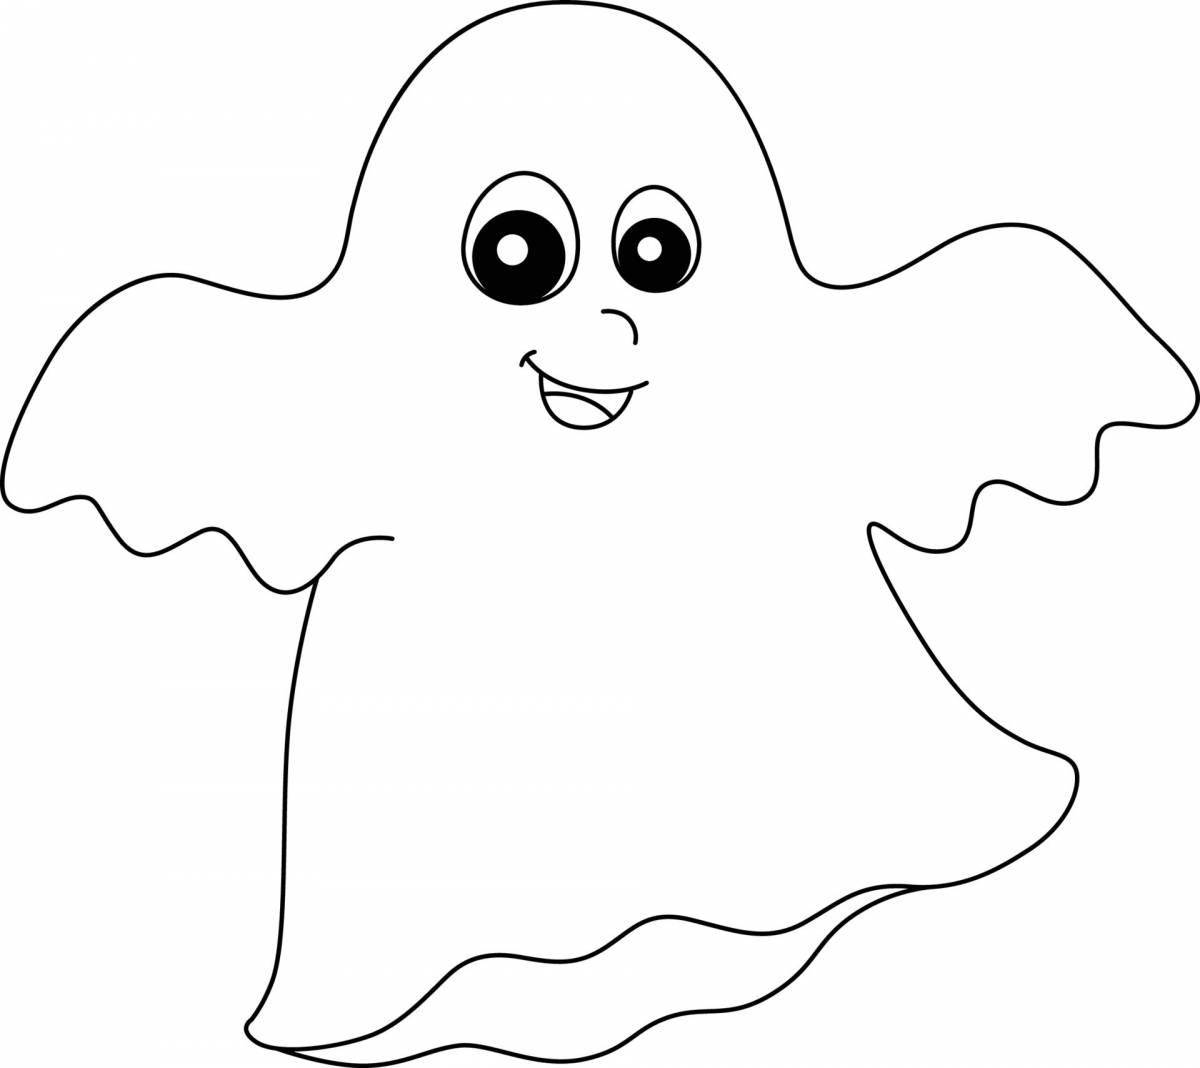 Cool coloring ghost for kids